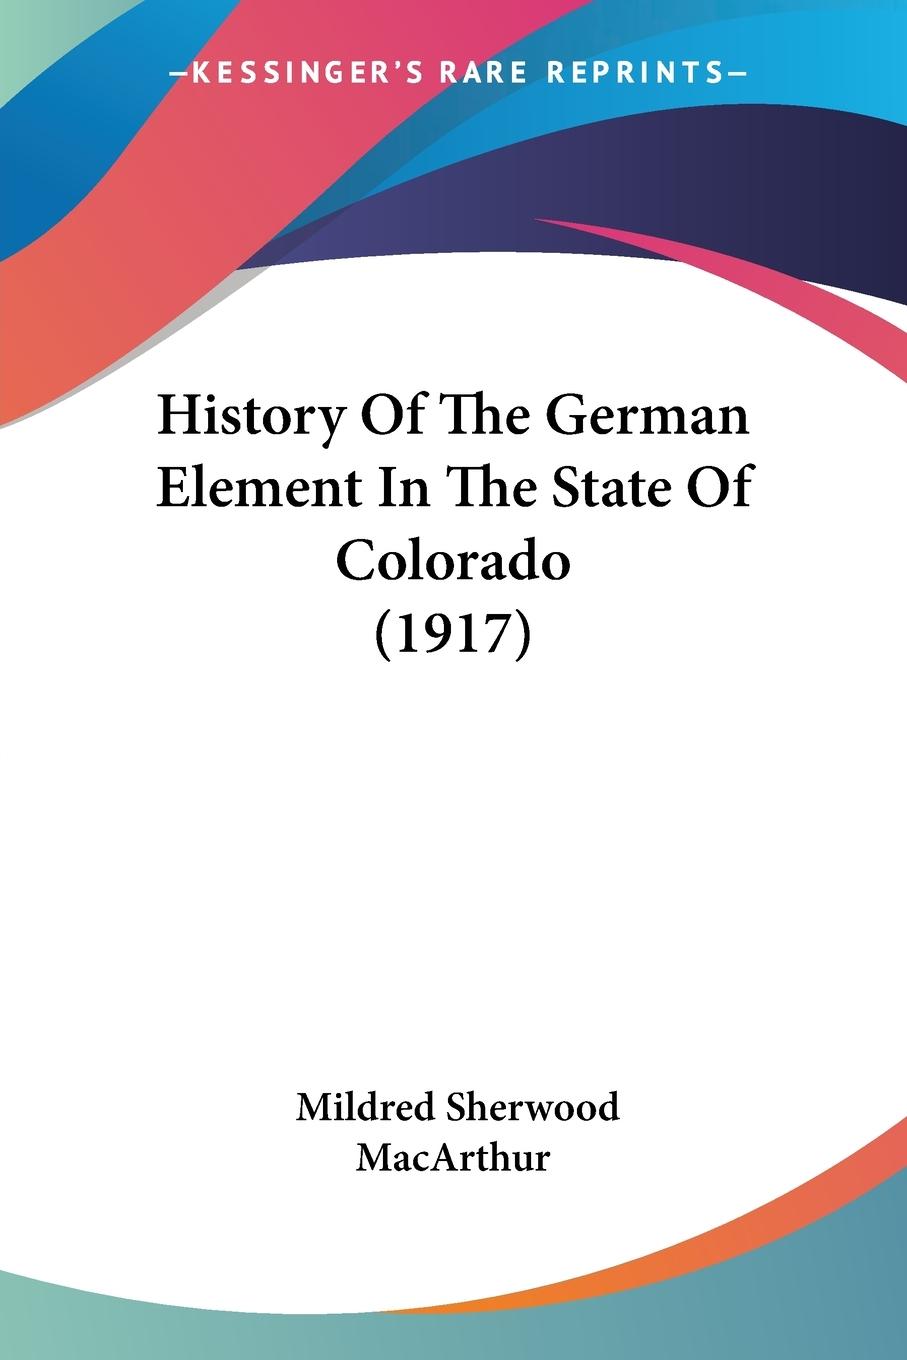 History Of The German Element In The State Of Colorado (1917) - MacArthur, Mildred Sherwood